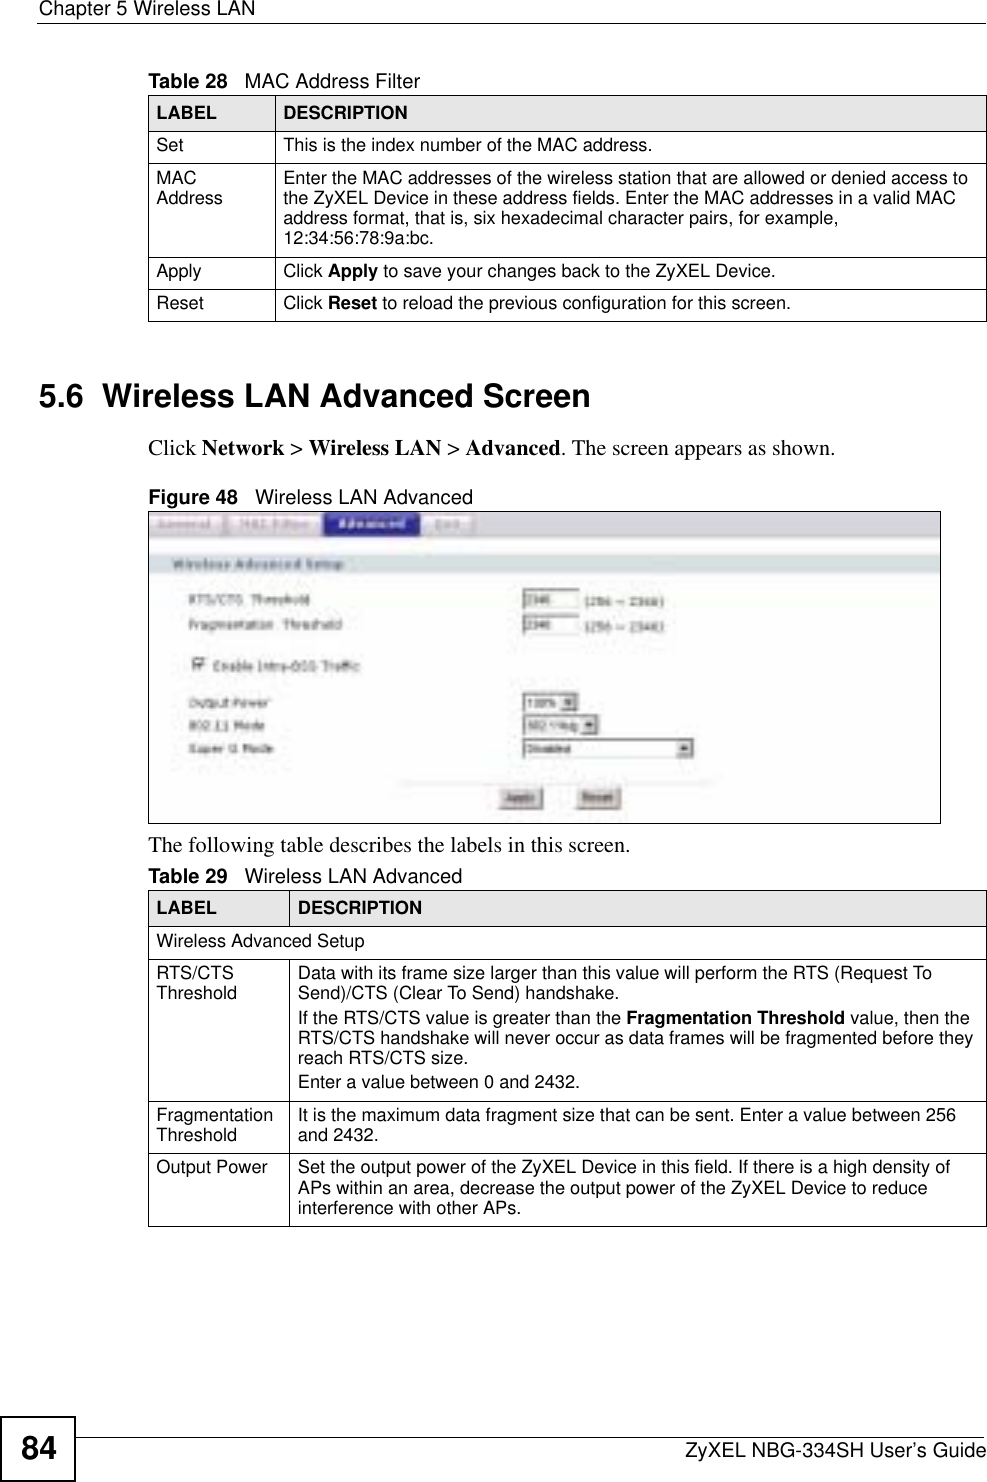 Chapter 5 Wireless LANZyXEL NBG-334SH User’s Guide845.6  Wireless LAN Advanced ScreenClick Network &gt; Wireless LAN &gt; Advanced. The screen appears as shown.Figure 48   Wireless LAN AdvancedThe following table describes the labels in this screen. Set This is the index number of the MAC address.MAC Address Enter the MAC addresses of the wireless station that are allowed or denied access to the ZyXEL Device in these address fields. Enter the MAC addresses in a valid MAC address format, that is, six hexadecimal character pairs, for example, 12:34:56:78:9a:bc.Apply Click Apply to save your changes back to the ZyXEL Device.Reset Click Reset to reload the previous configuration for this screen.Table 28   MAC Address FilterLABEL DESCRIPTIONTable 29   Wireless LAN AdvancedLABEL DESCRIPTIONWireless Advanced SetupRTS/CTS Threshold Data with its frame size larger than this value will perform the RTS (Request To Send)/CTS (Clear To Send) handshake. If the RTS/CTS value is greater than the Fragmentation Threshold value, then the RTS/CTS handshake will never occur as data frames will be fragmented before they reach RTS/CTS size.Enter a value between 0 and 2432. Fragmentation Threshold It is the maximum data fragment size that can be sent. Enter a value between 256 and 2432. Output Power  Set the output power of the ZyXEL Device in this field. If there is a high density of APs within an area, decrease the output power of the ZyXEL Device to reduce interference with other APs.